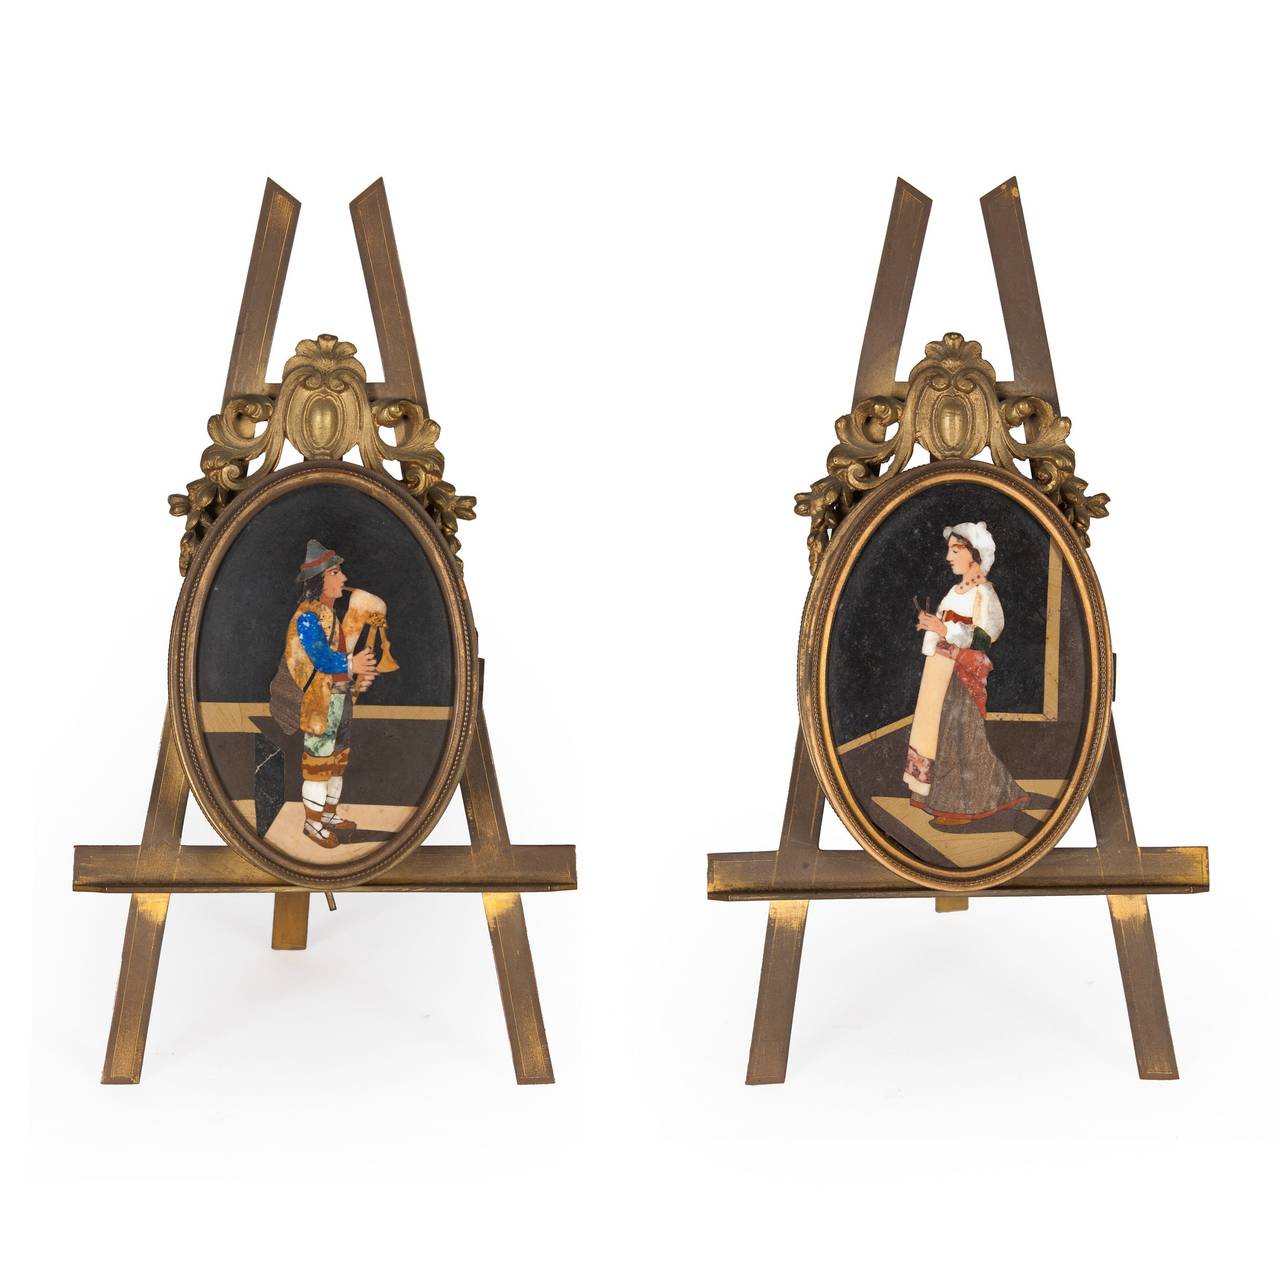 Inlaid with an Italian peasant man playing the bagpipes and a woman knitting, each in gilt metal mount with scroll cresting on a strut stand, opening to reveal a double, glazed frame.